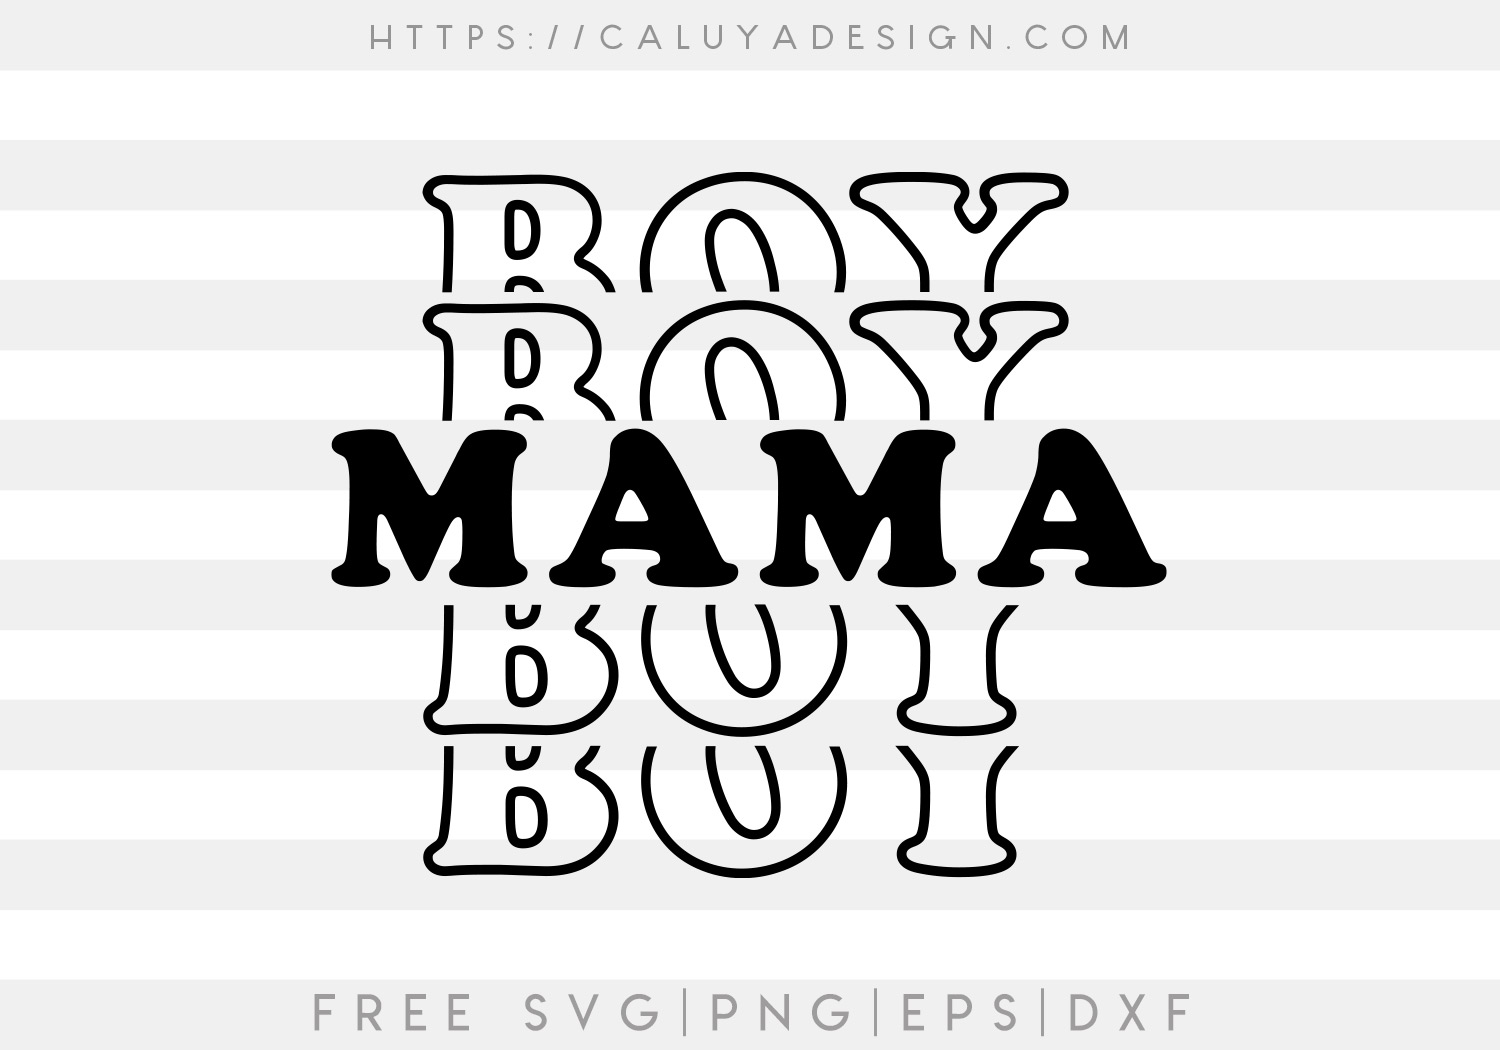 Download Free Mama Boy Svg Png Eps Dxf By Caluya Design